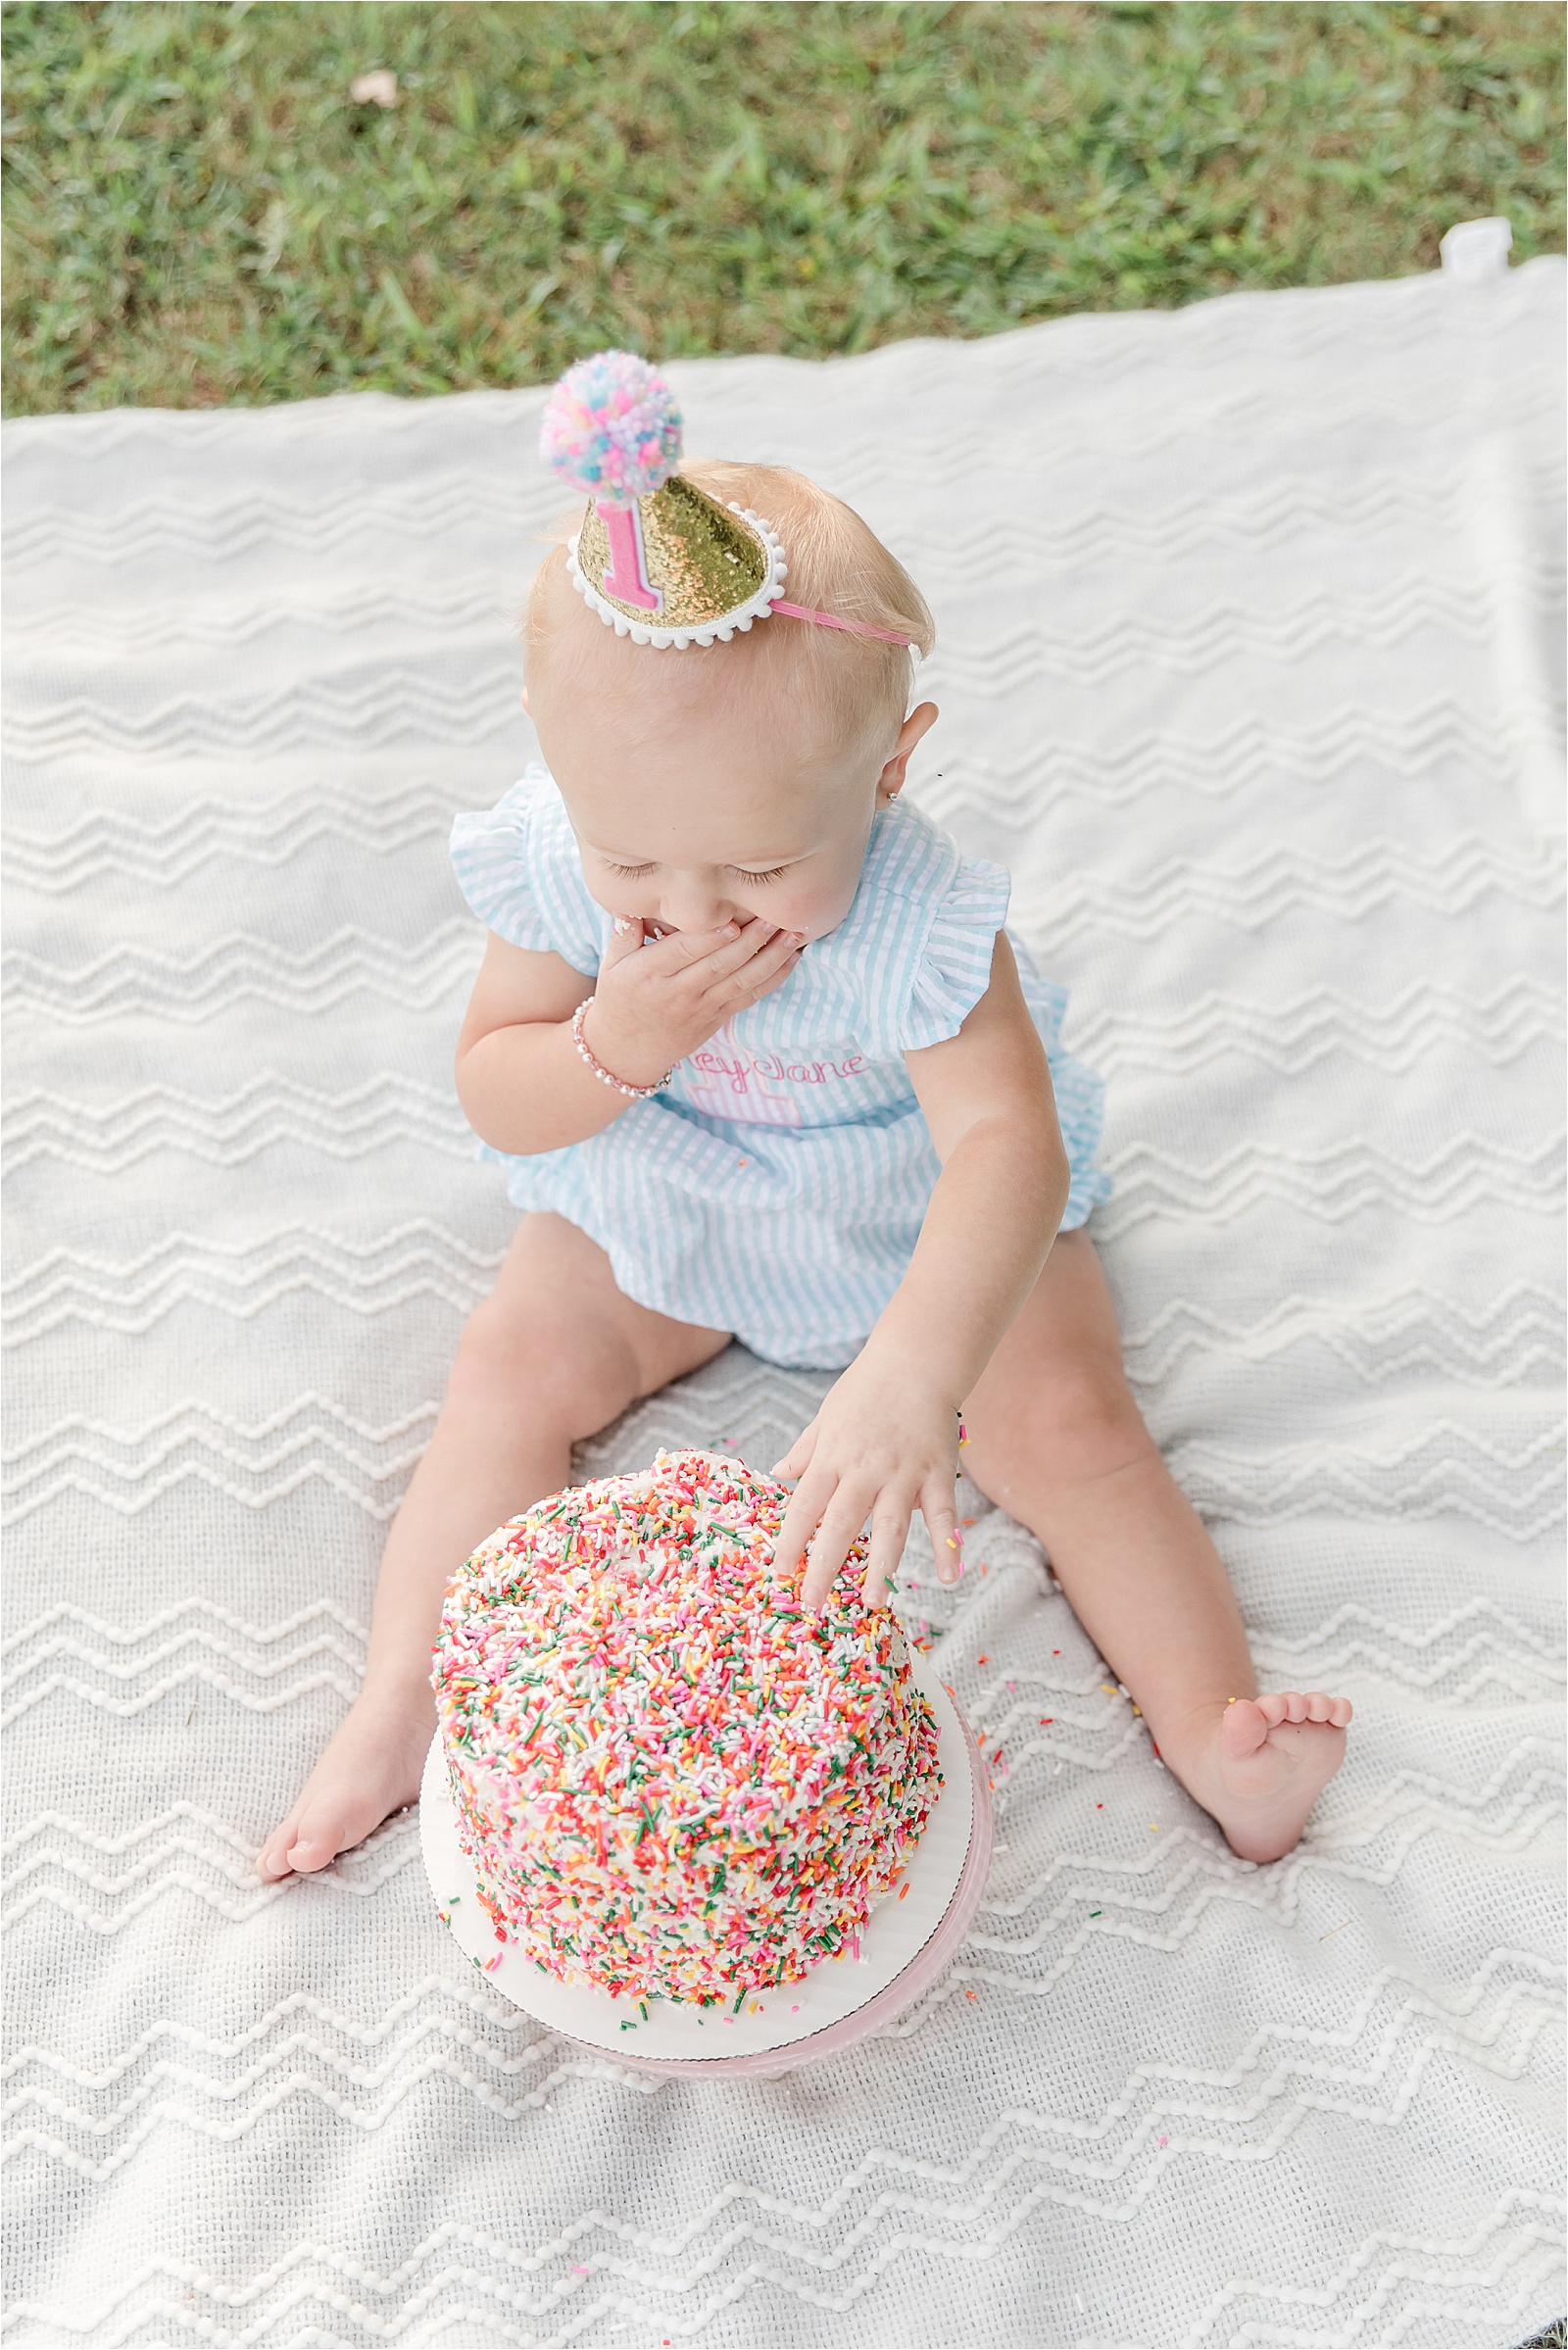 Baby girl with sequin party hat eating a sprinkle cake by photographer in Greenville SC